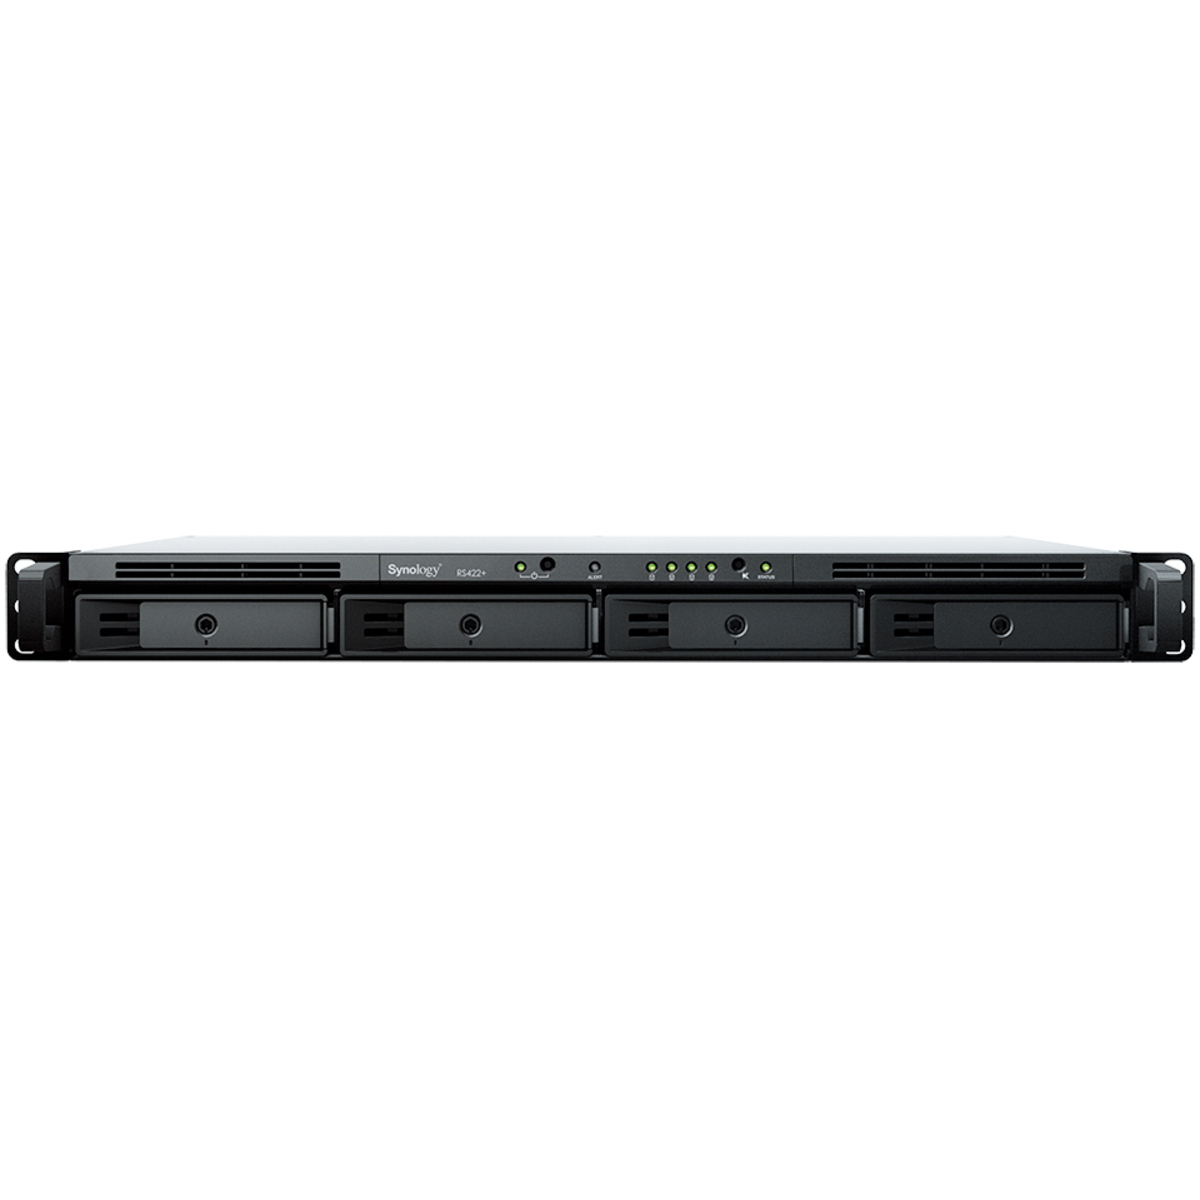 Synology RackStation RS422+ 56tb 4-Bay RackMount Personal / Basic Home / Small Office NAS - Network Attached Storage Device 4x14tb Seagate IronWolf Pro ST14000NT001 3.5 7200rpm SATA 6Gb/s HDD NAS Class Drives Installed - Burn-In Tested RackStation RS422+